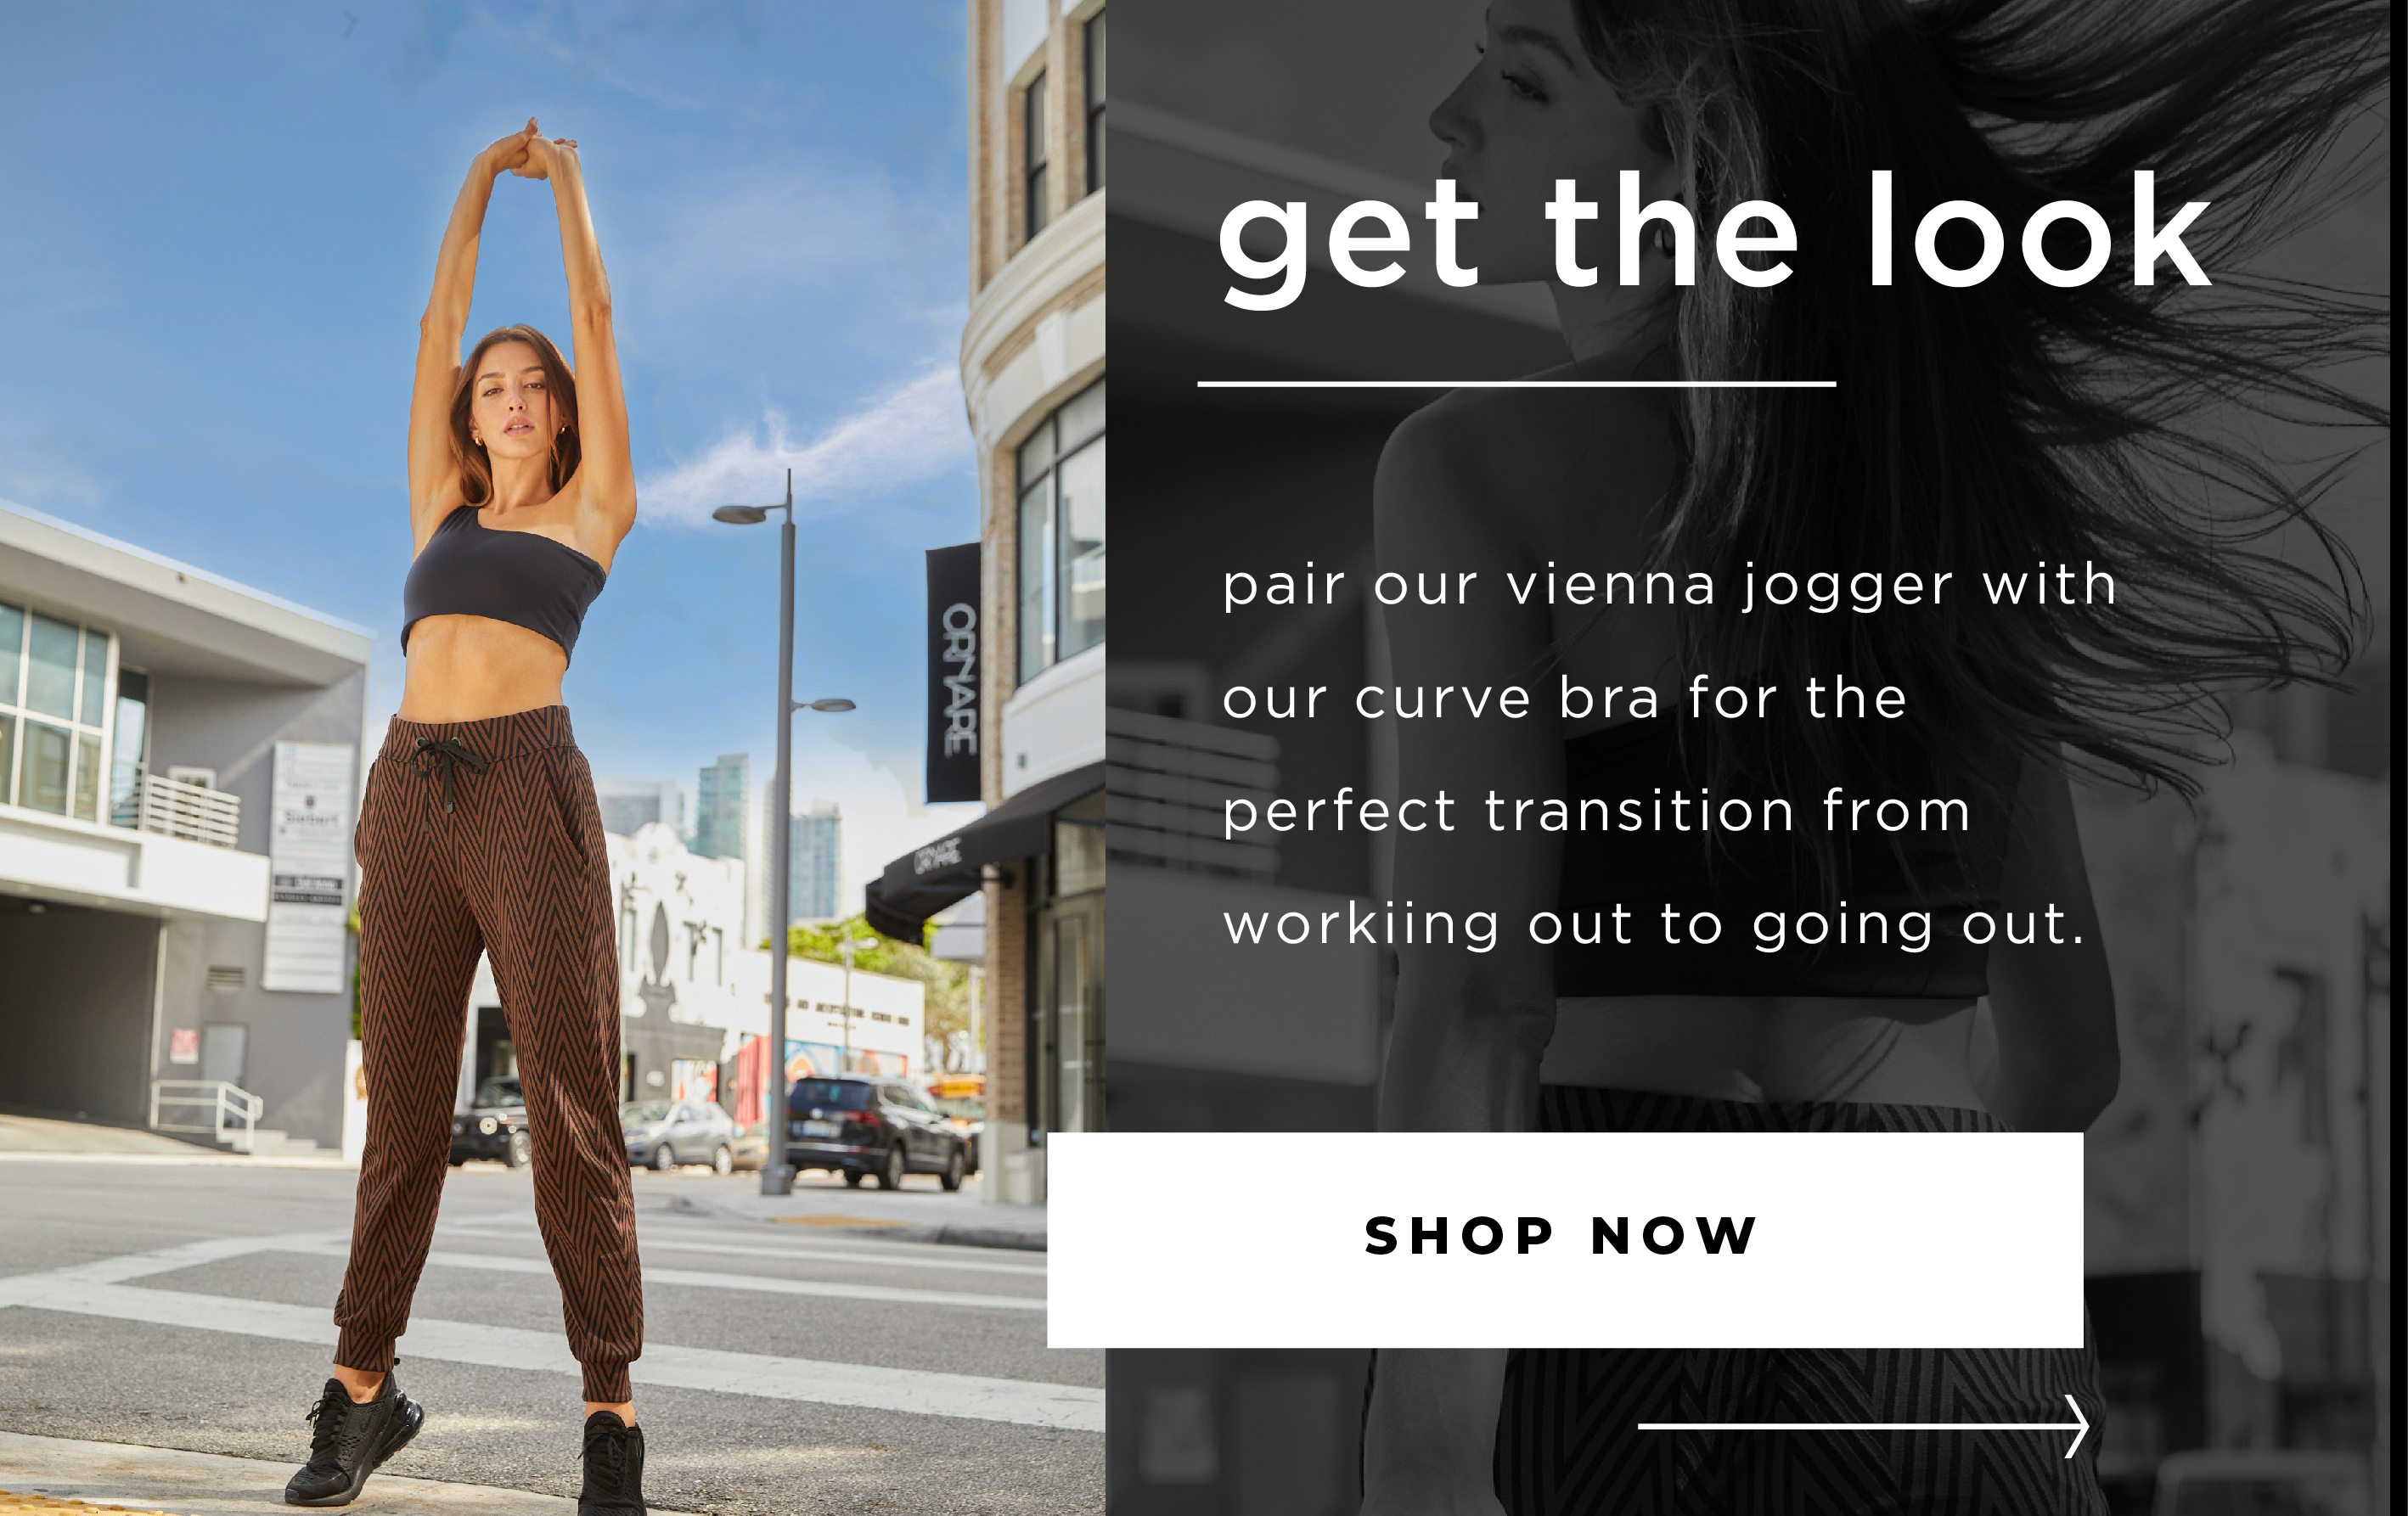 get the look - pair our Vienna jogger with our curve bra for the perfect transition from working out to going out